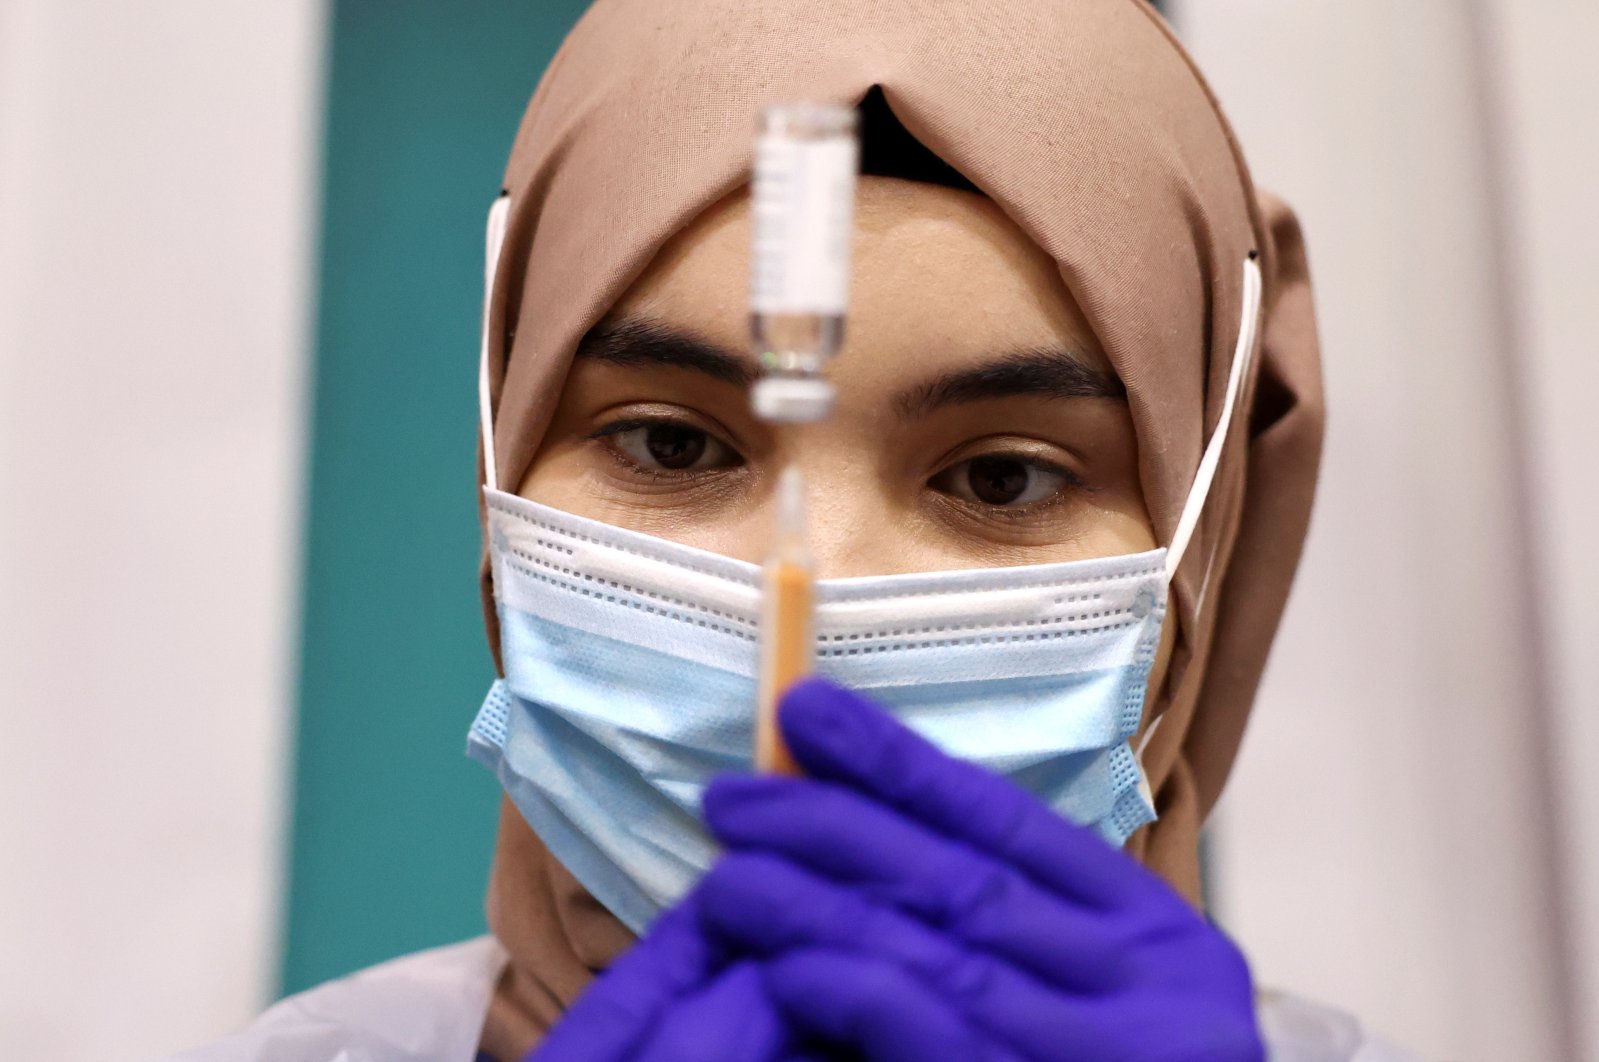 A medical worker prepares an injection with a dose of AstraZeneca coronavirus vaccine, at a vaccination center at the Baitul Futuh Mosque in London, England, March 28, 2021. (Reuters Photo)